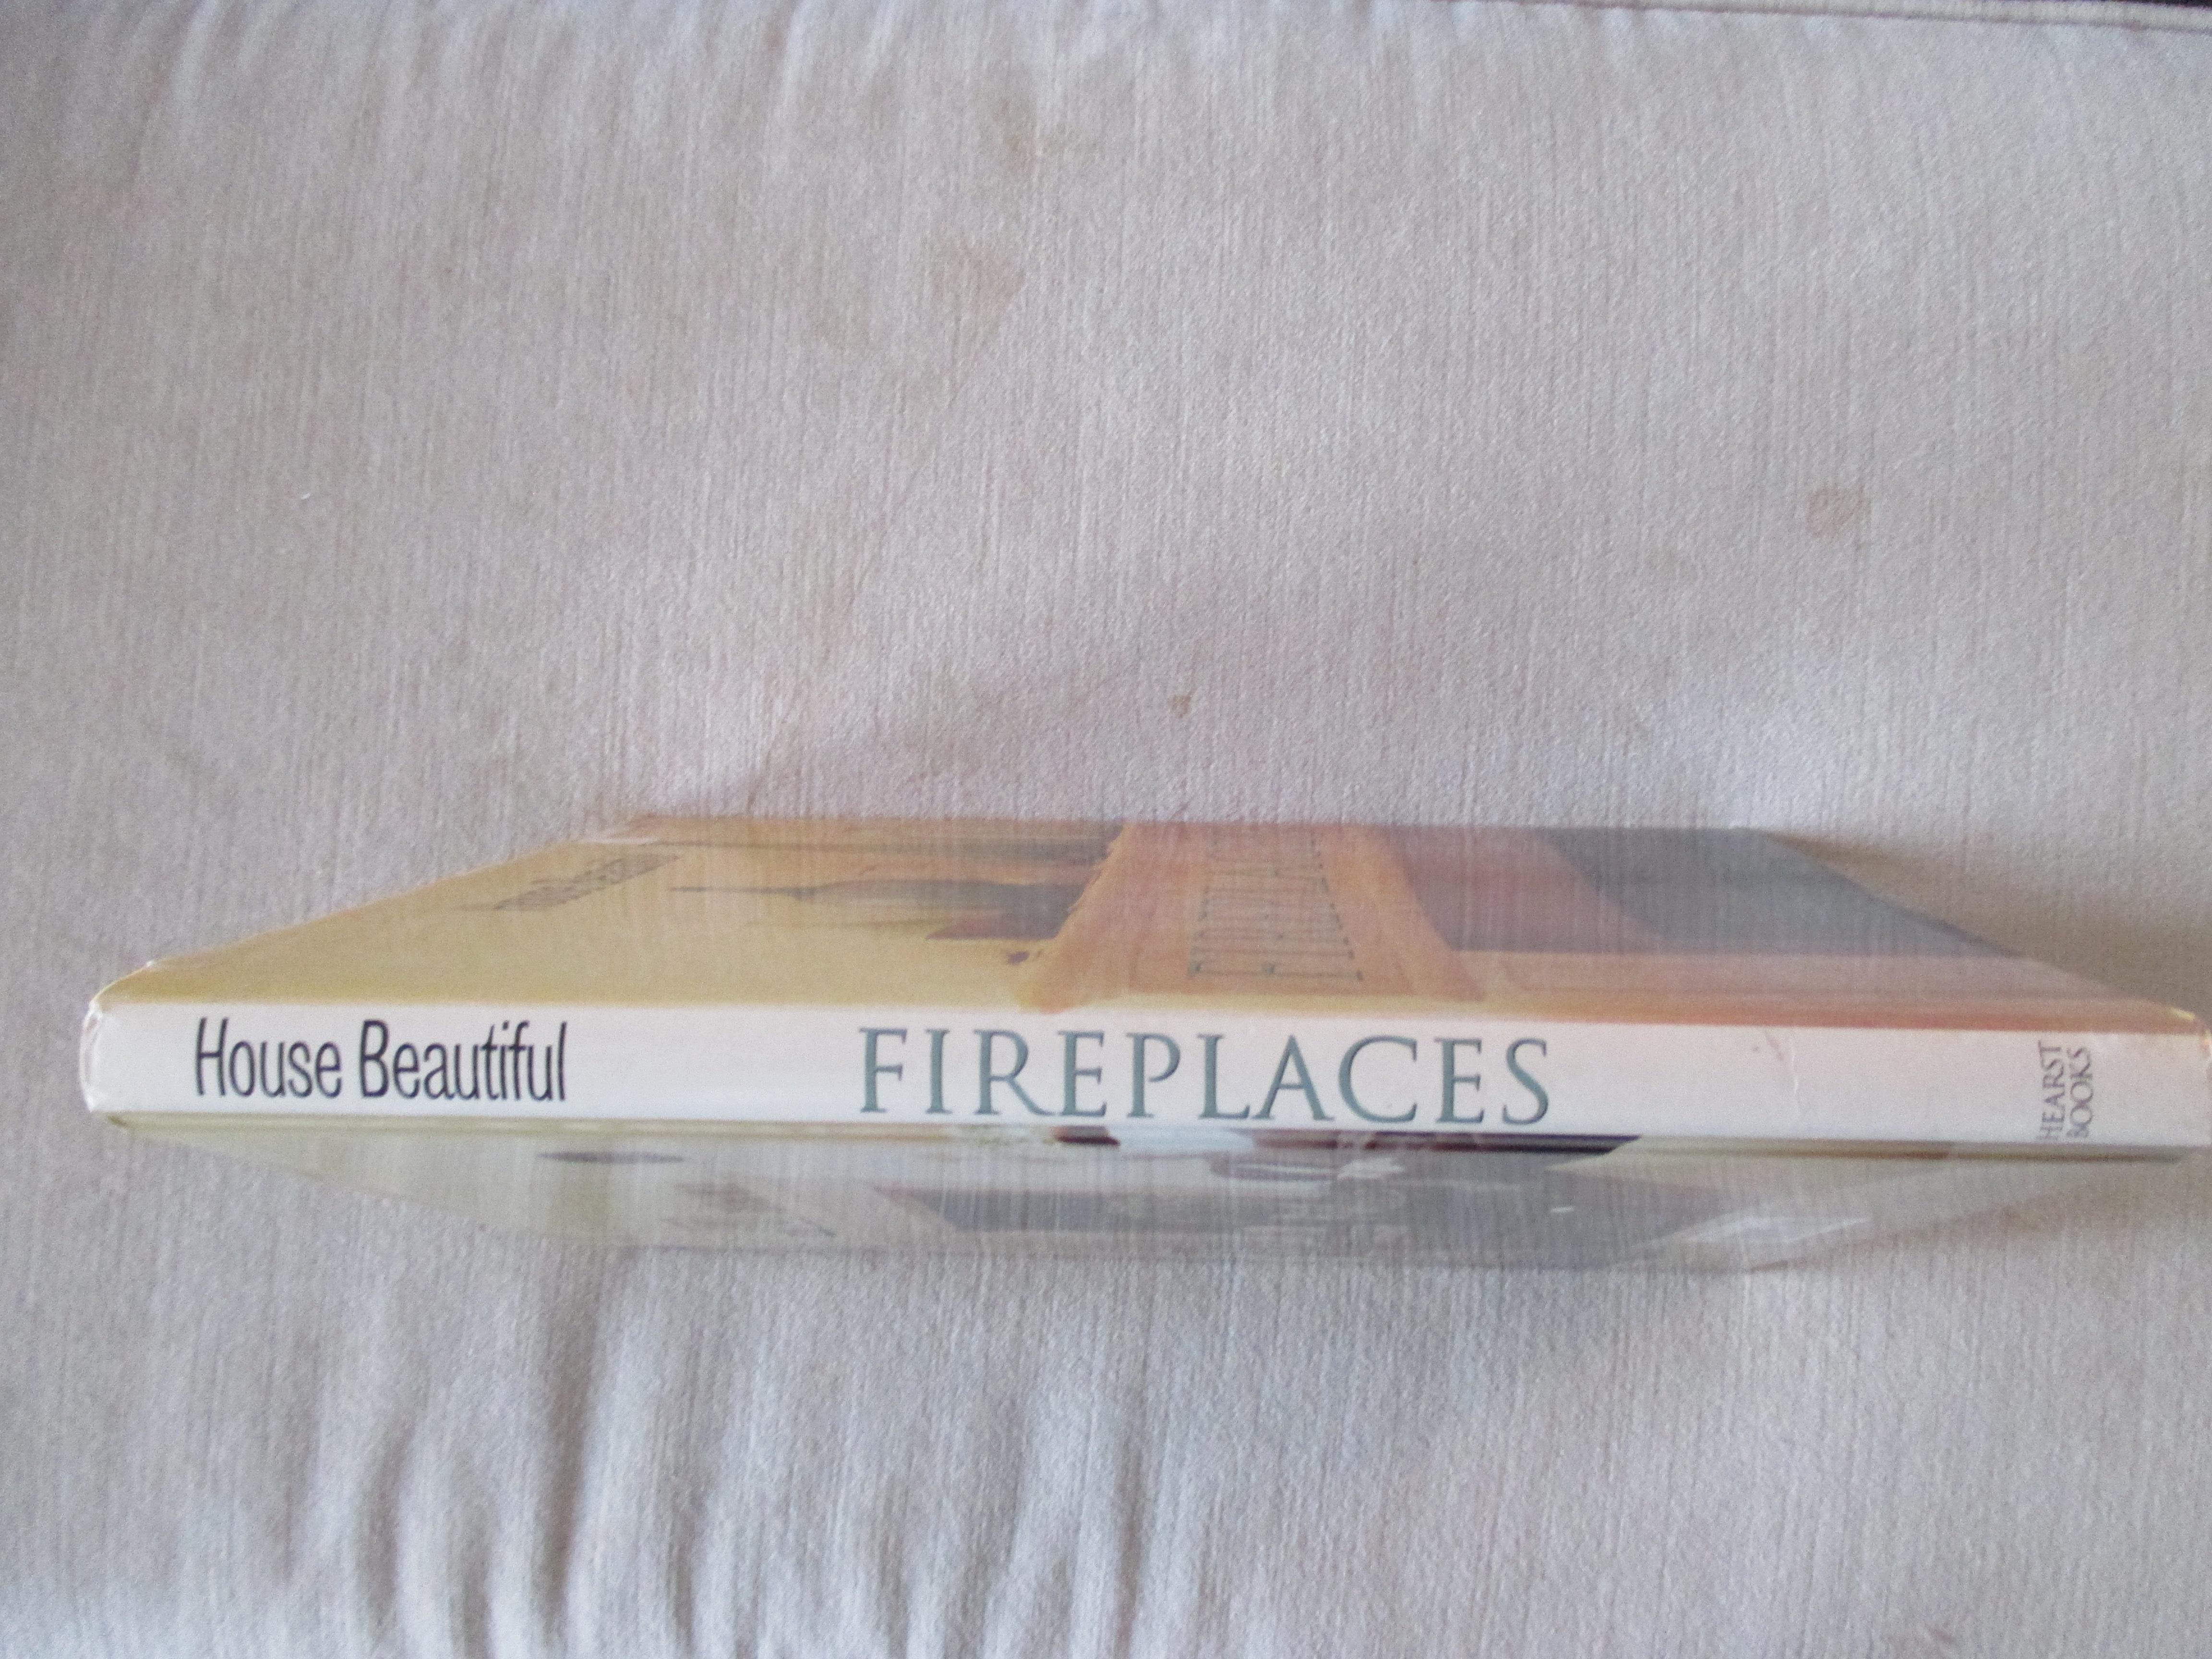 Late 20th Century Fireplaces Book by House Beautiful